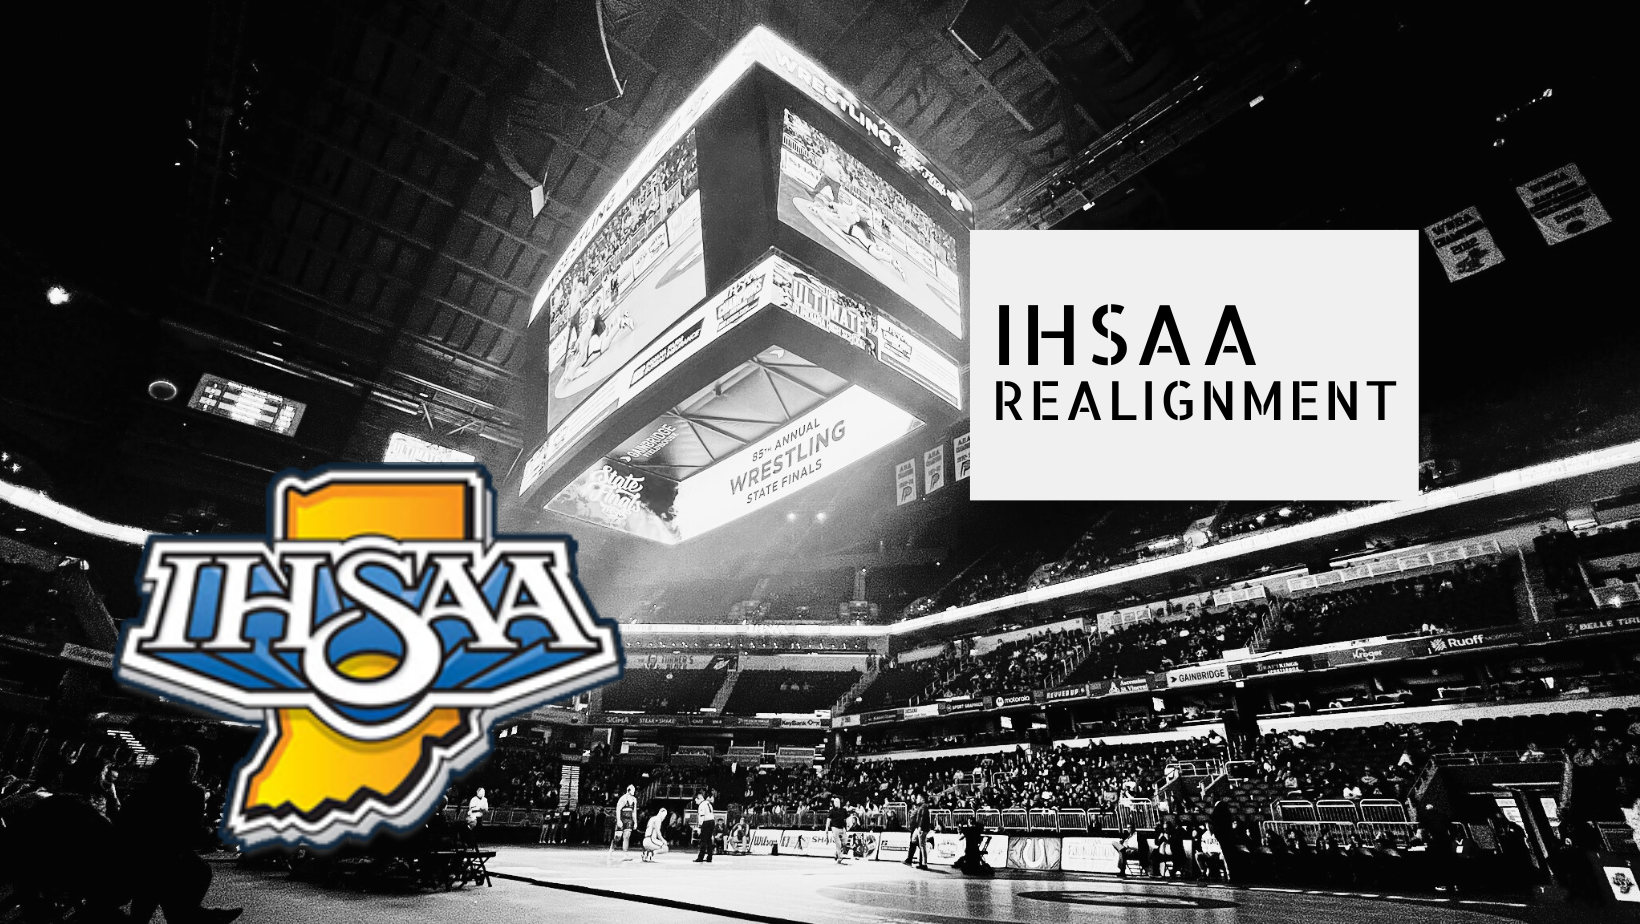 More information about "IHSAA Announces State Tournament Realignment"